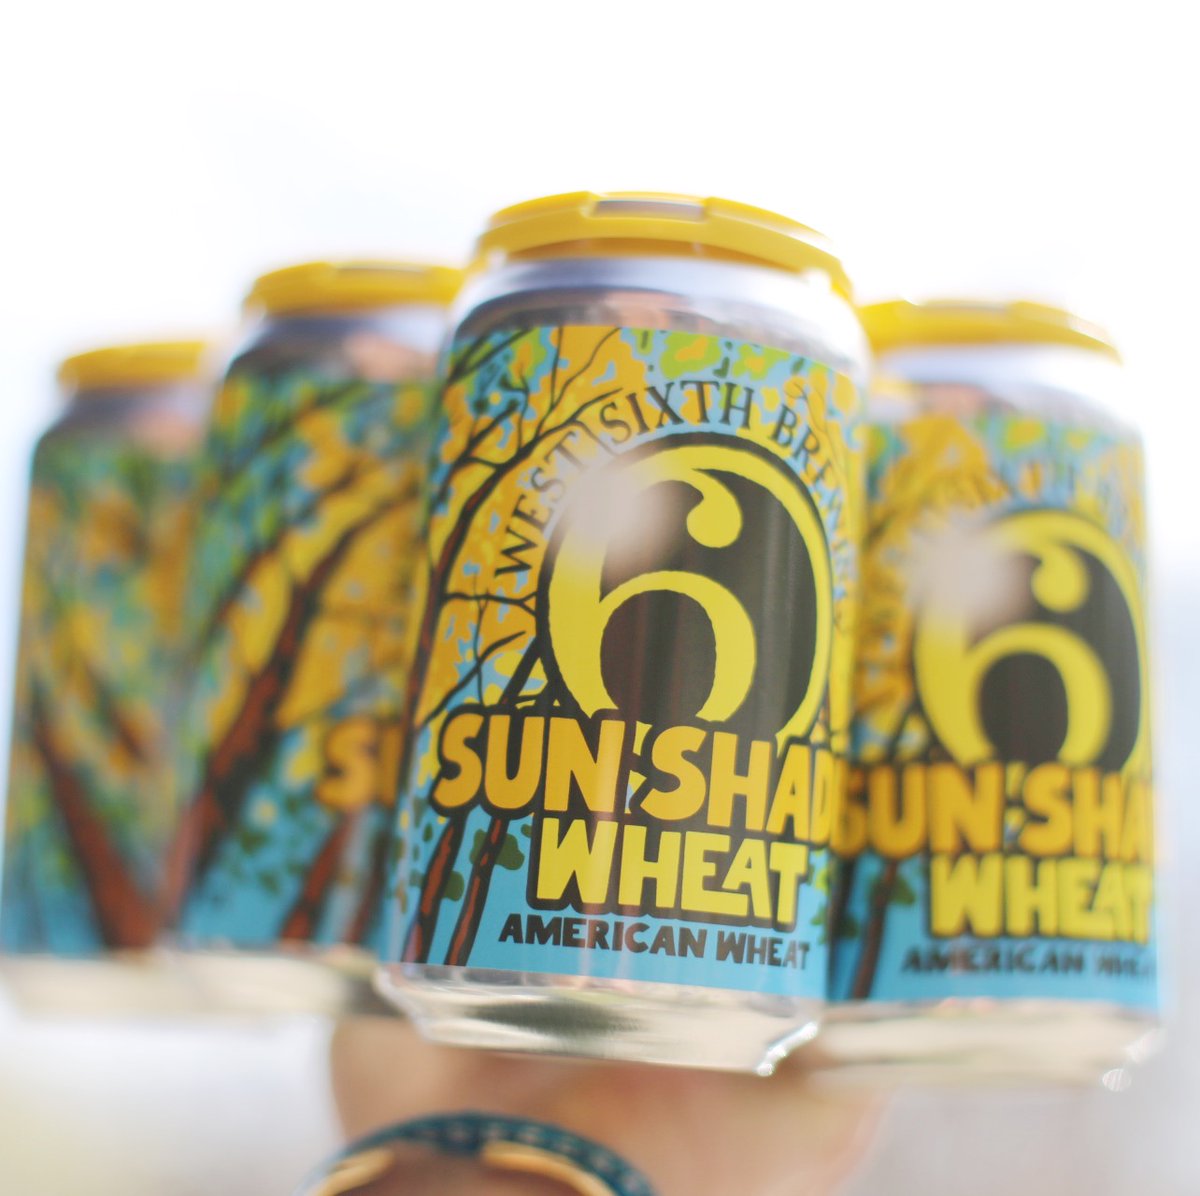 SUNSHADE WHEAT 💛🌾☀️ Our Spring seasonal is BACK in taprooms and on KY shelves starting Monday 3/25! With a full wheat malt backbone that's balanced by citrus esters, this easy drinking beer is like Springtime in a can (or a pint)! 🌸